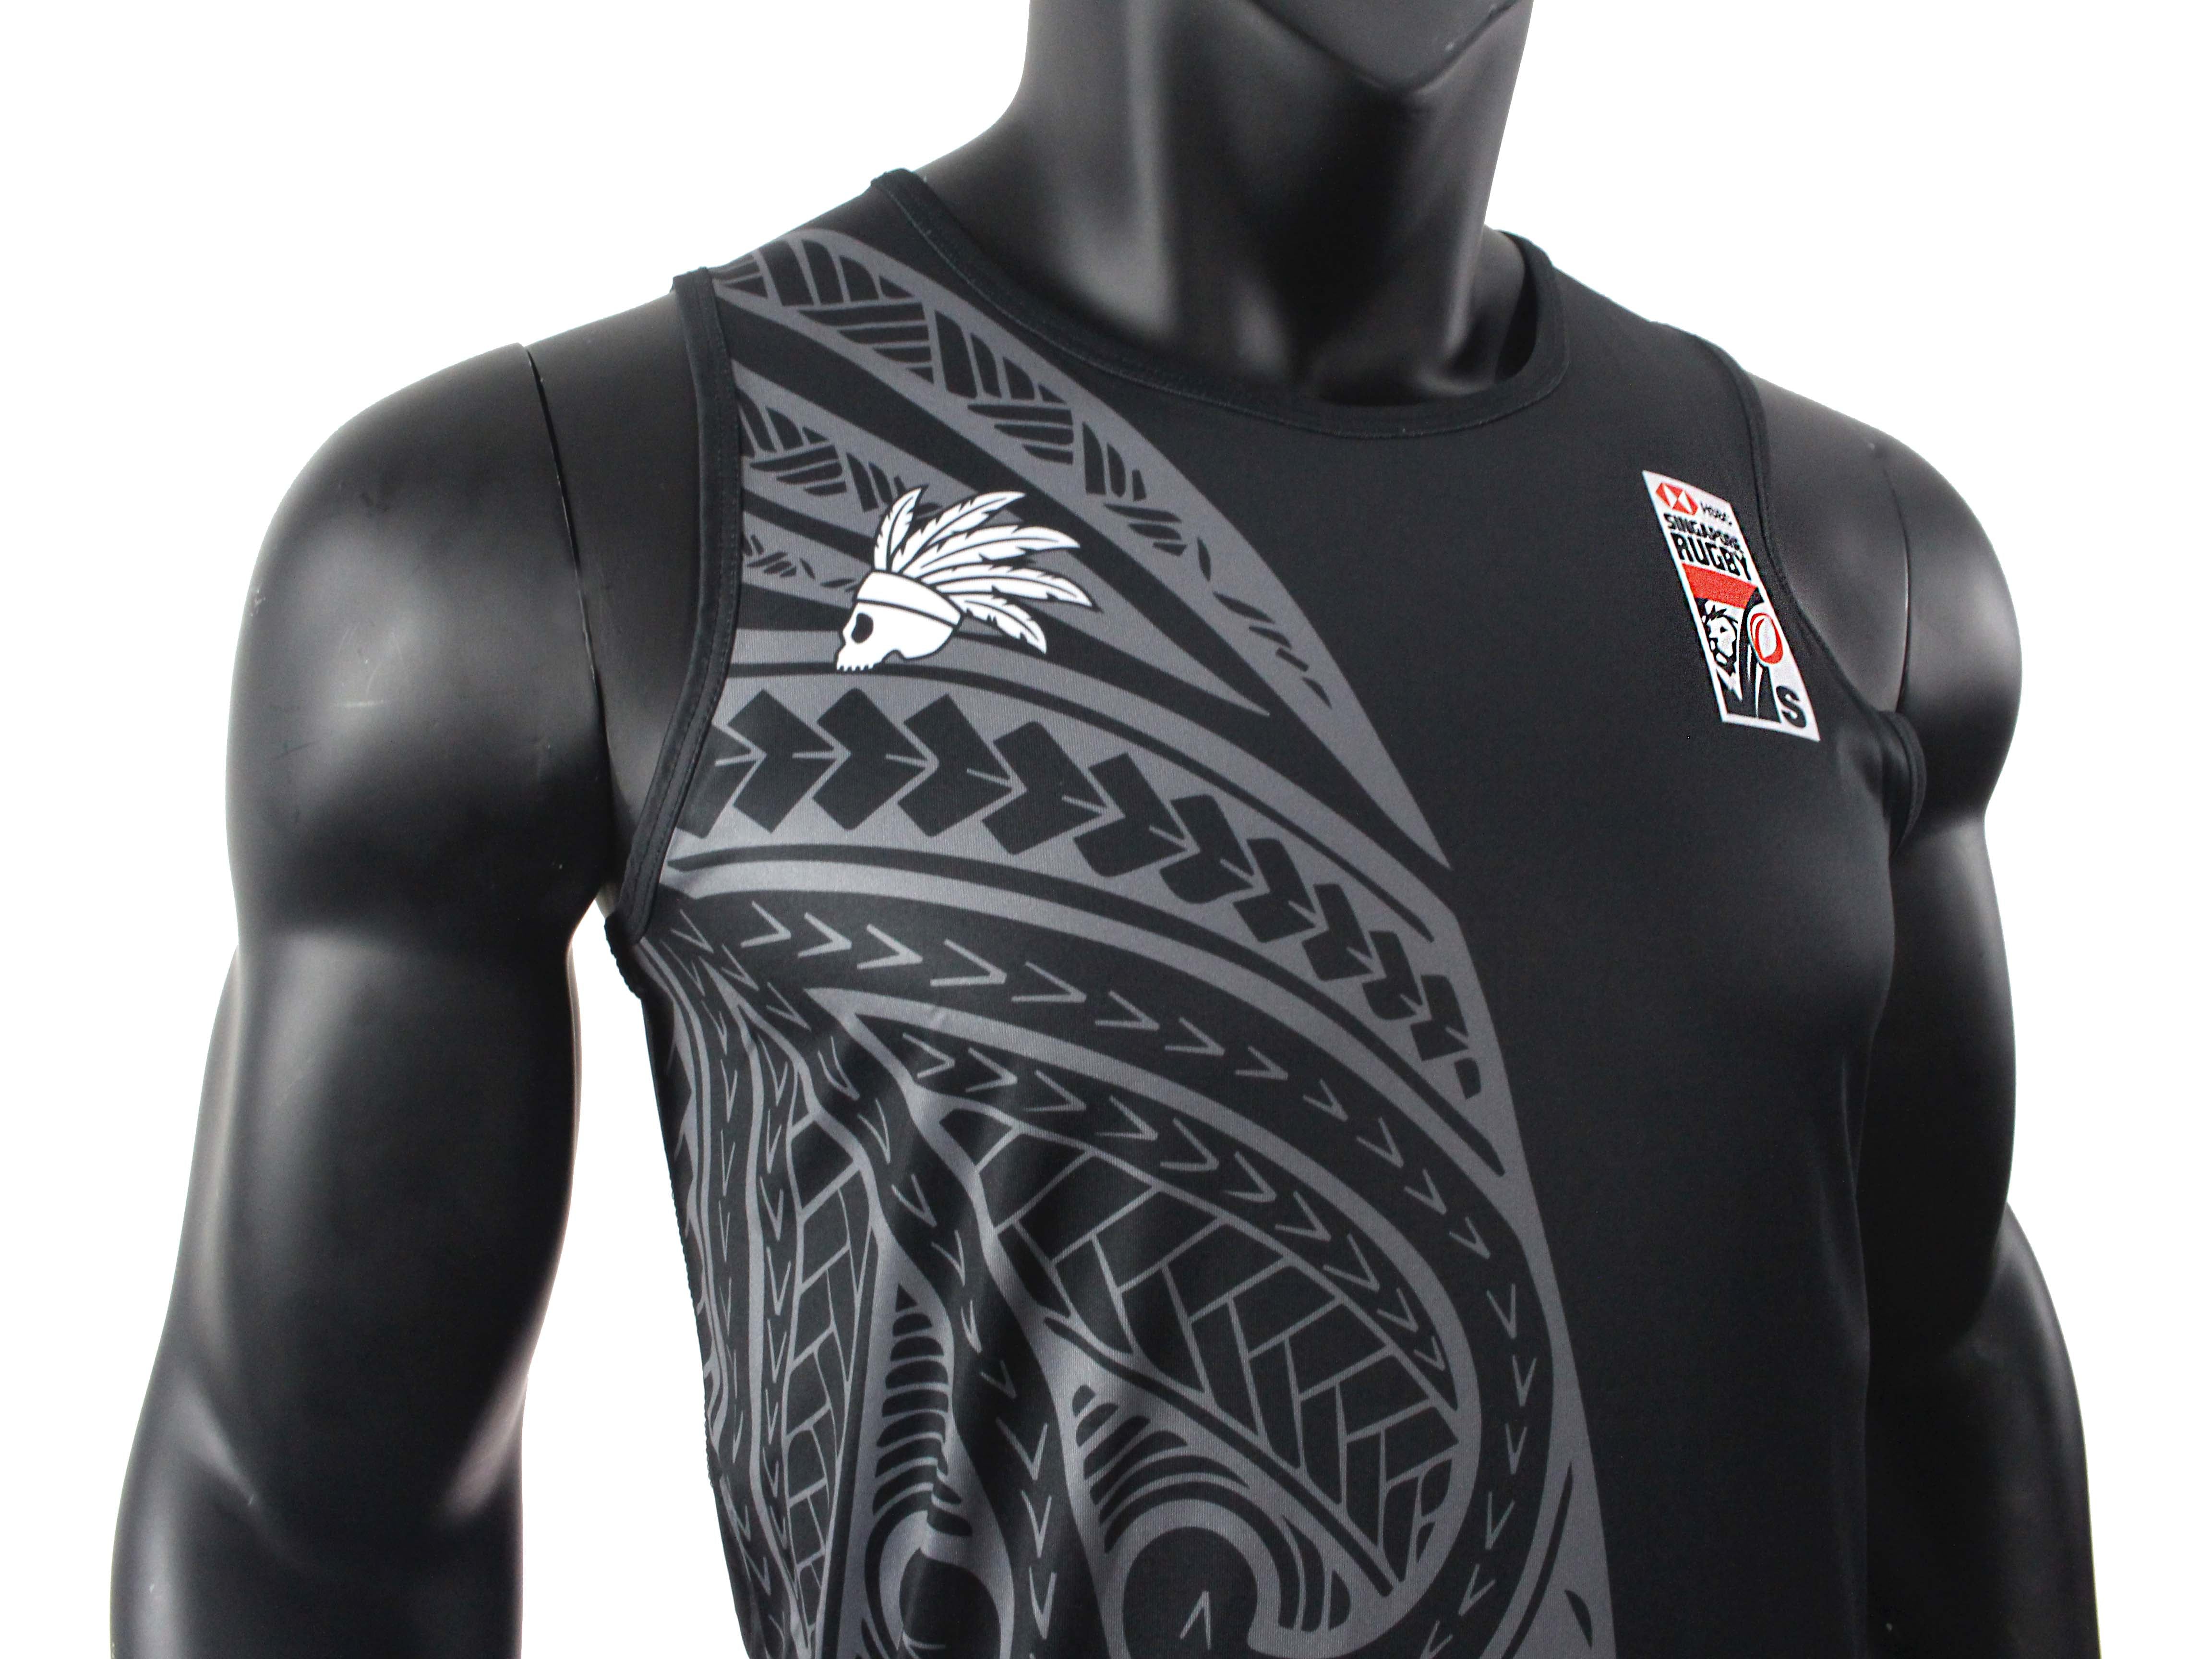 NEW ZEALAND RUGBY SINGLET